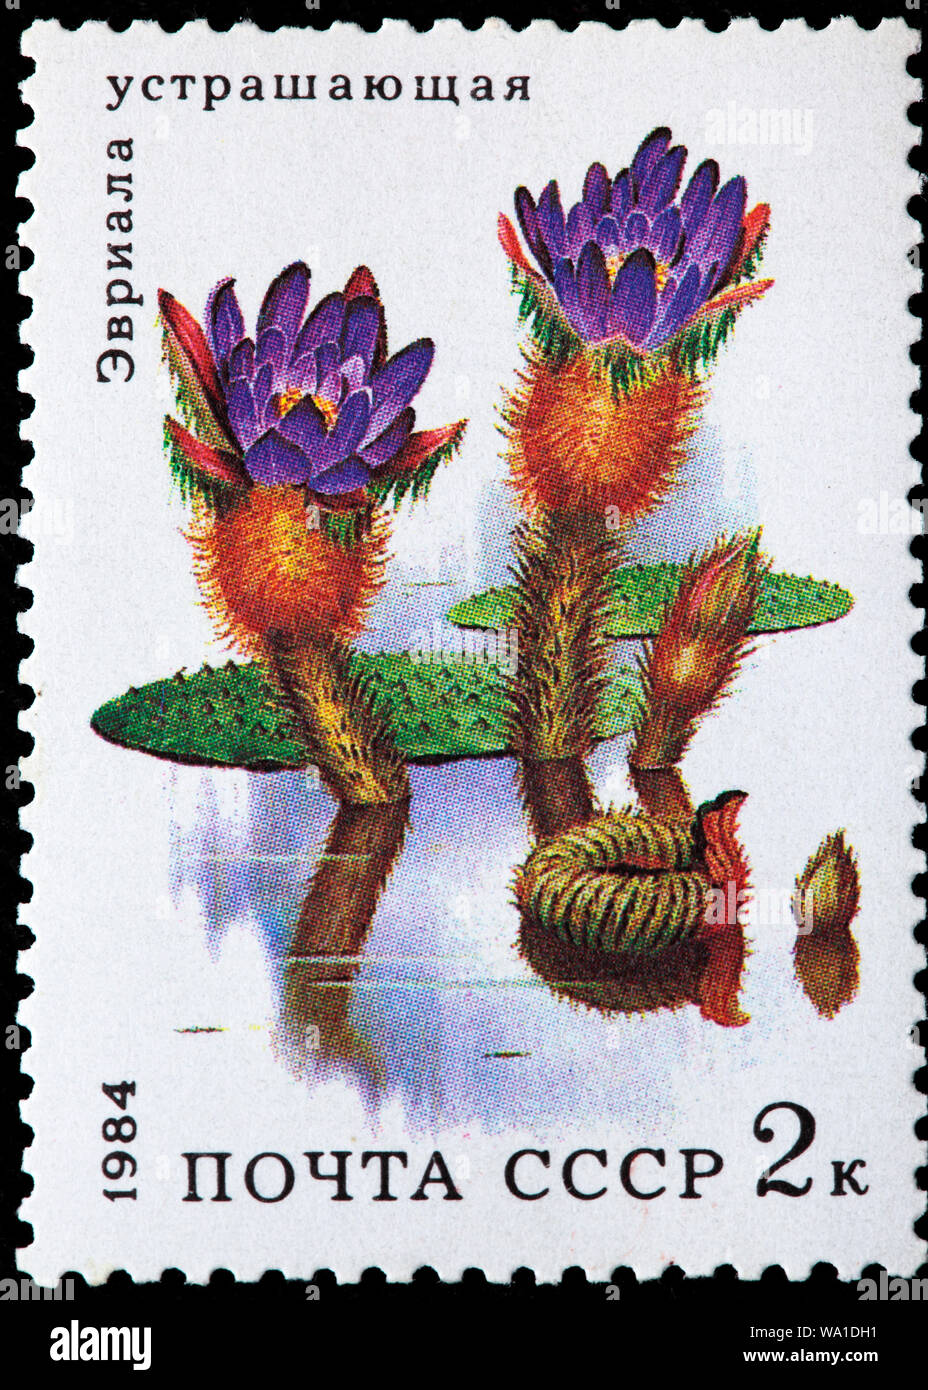 Euryale ferox, prickly waterlily, Aquatic flower, postage stamp, Russia, USSR, 1984 Stock Photo